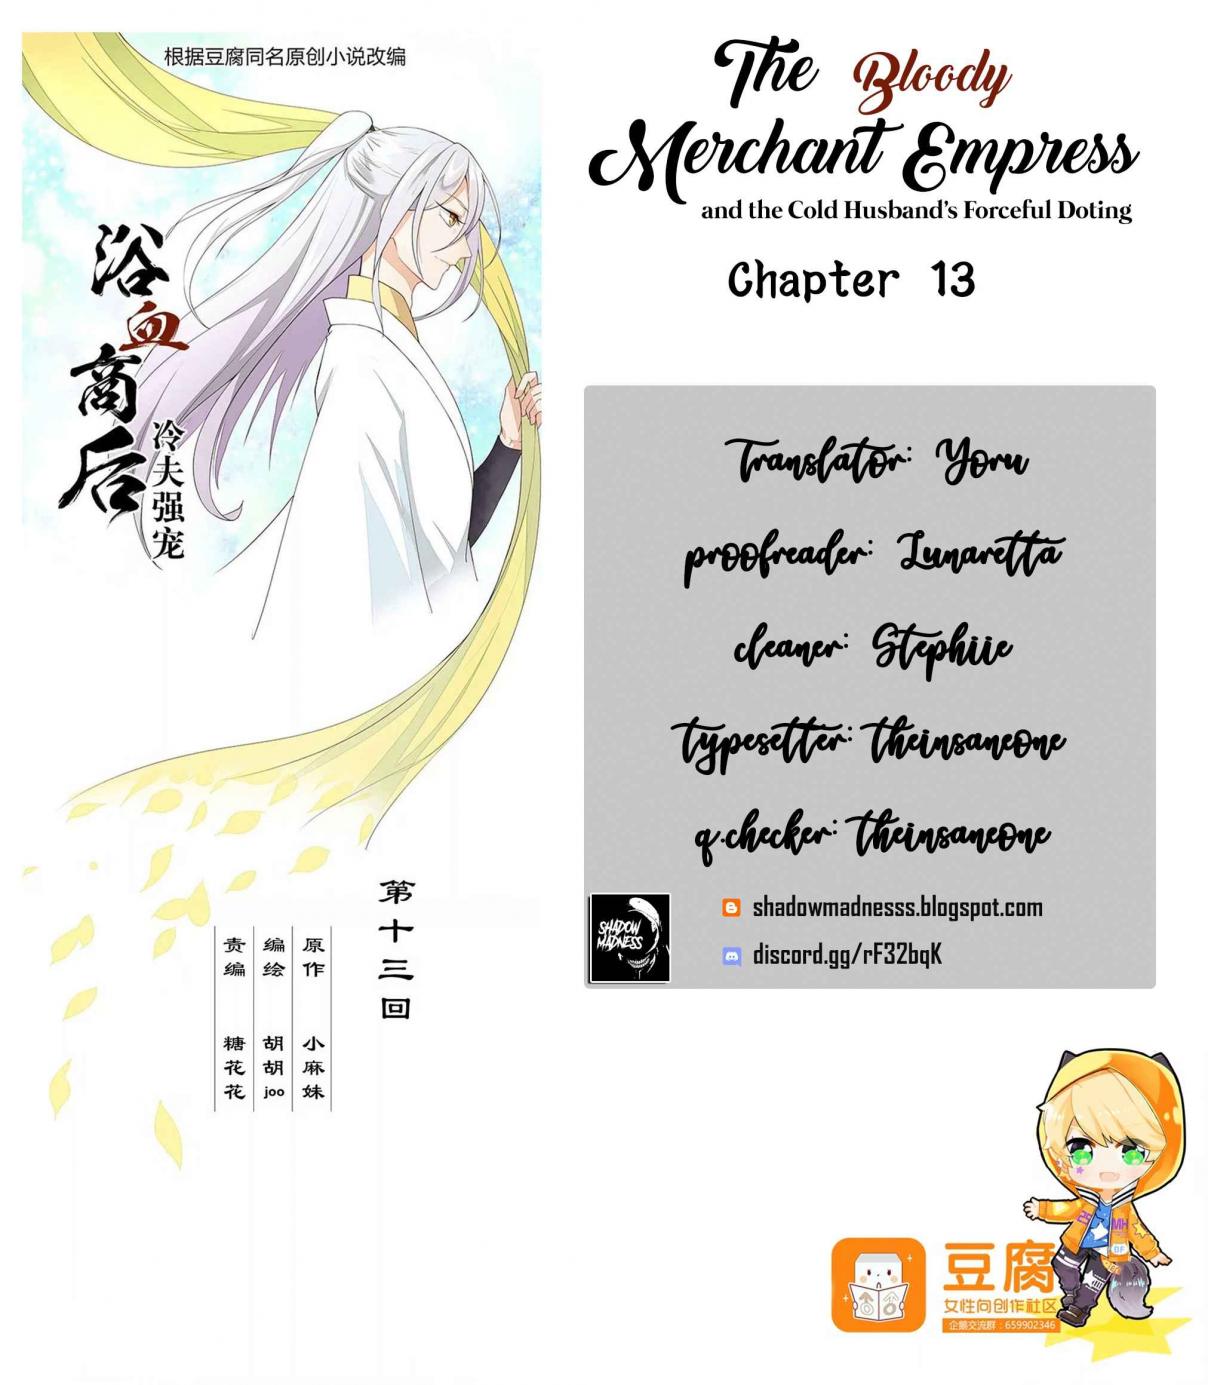 The Bloody Merchant Empress and the Cold Husband's Forceful Doting Ch. 13